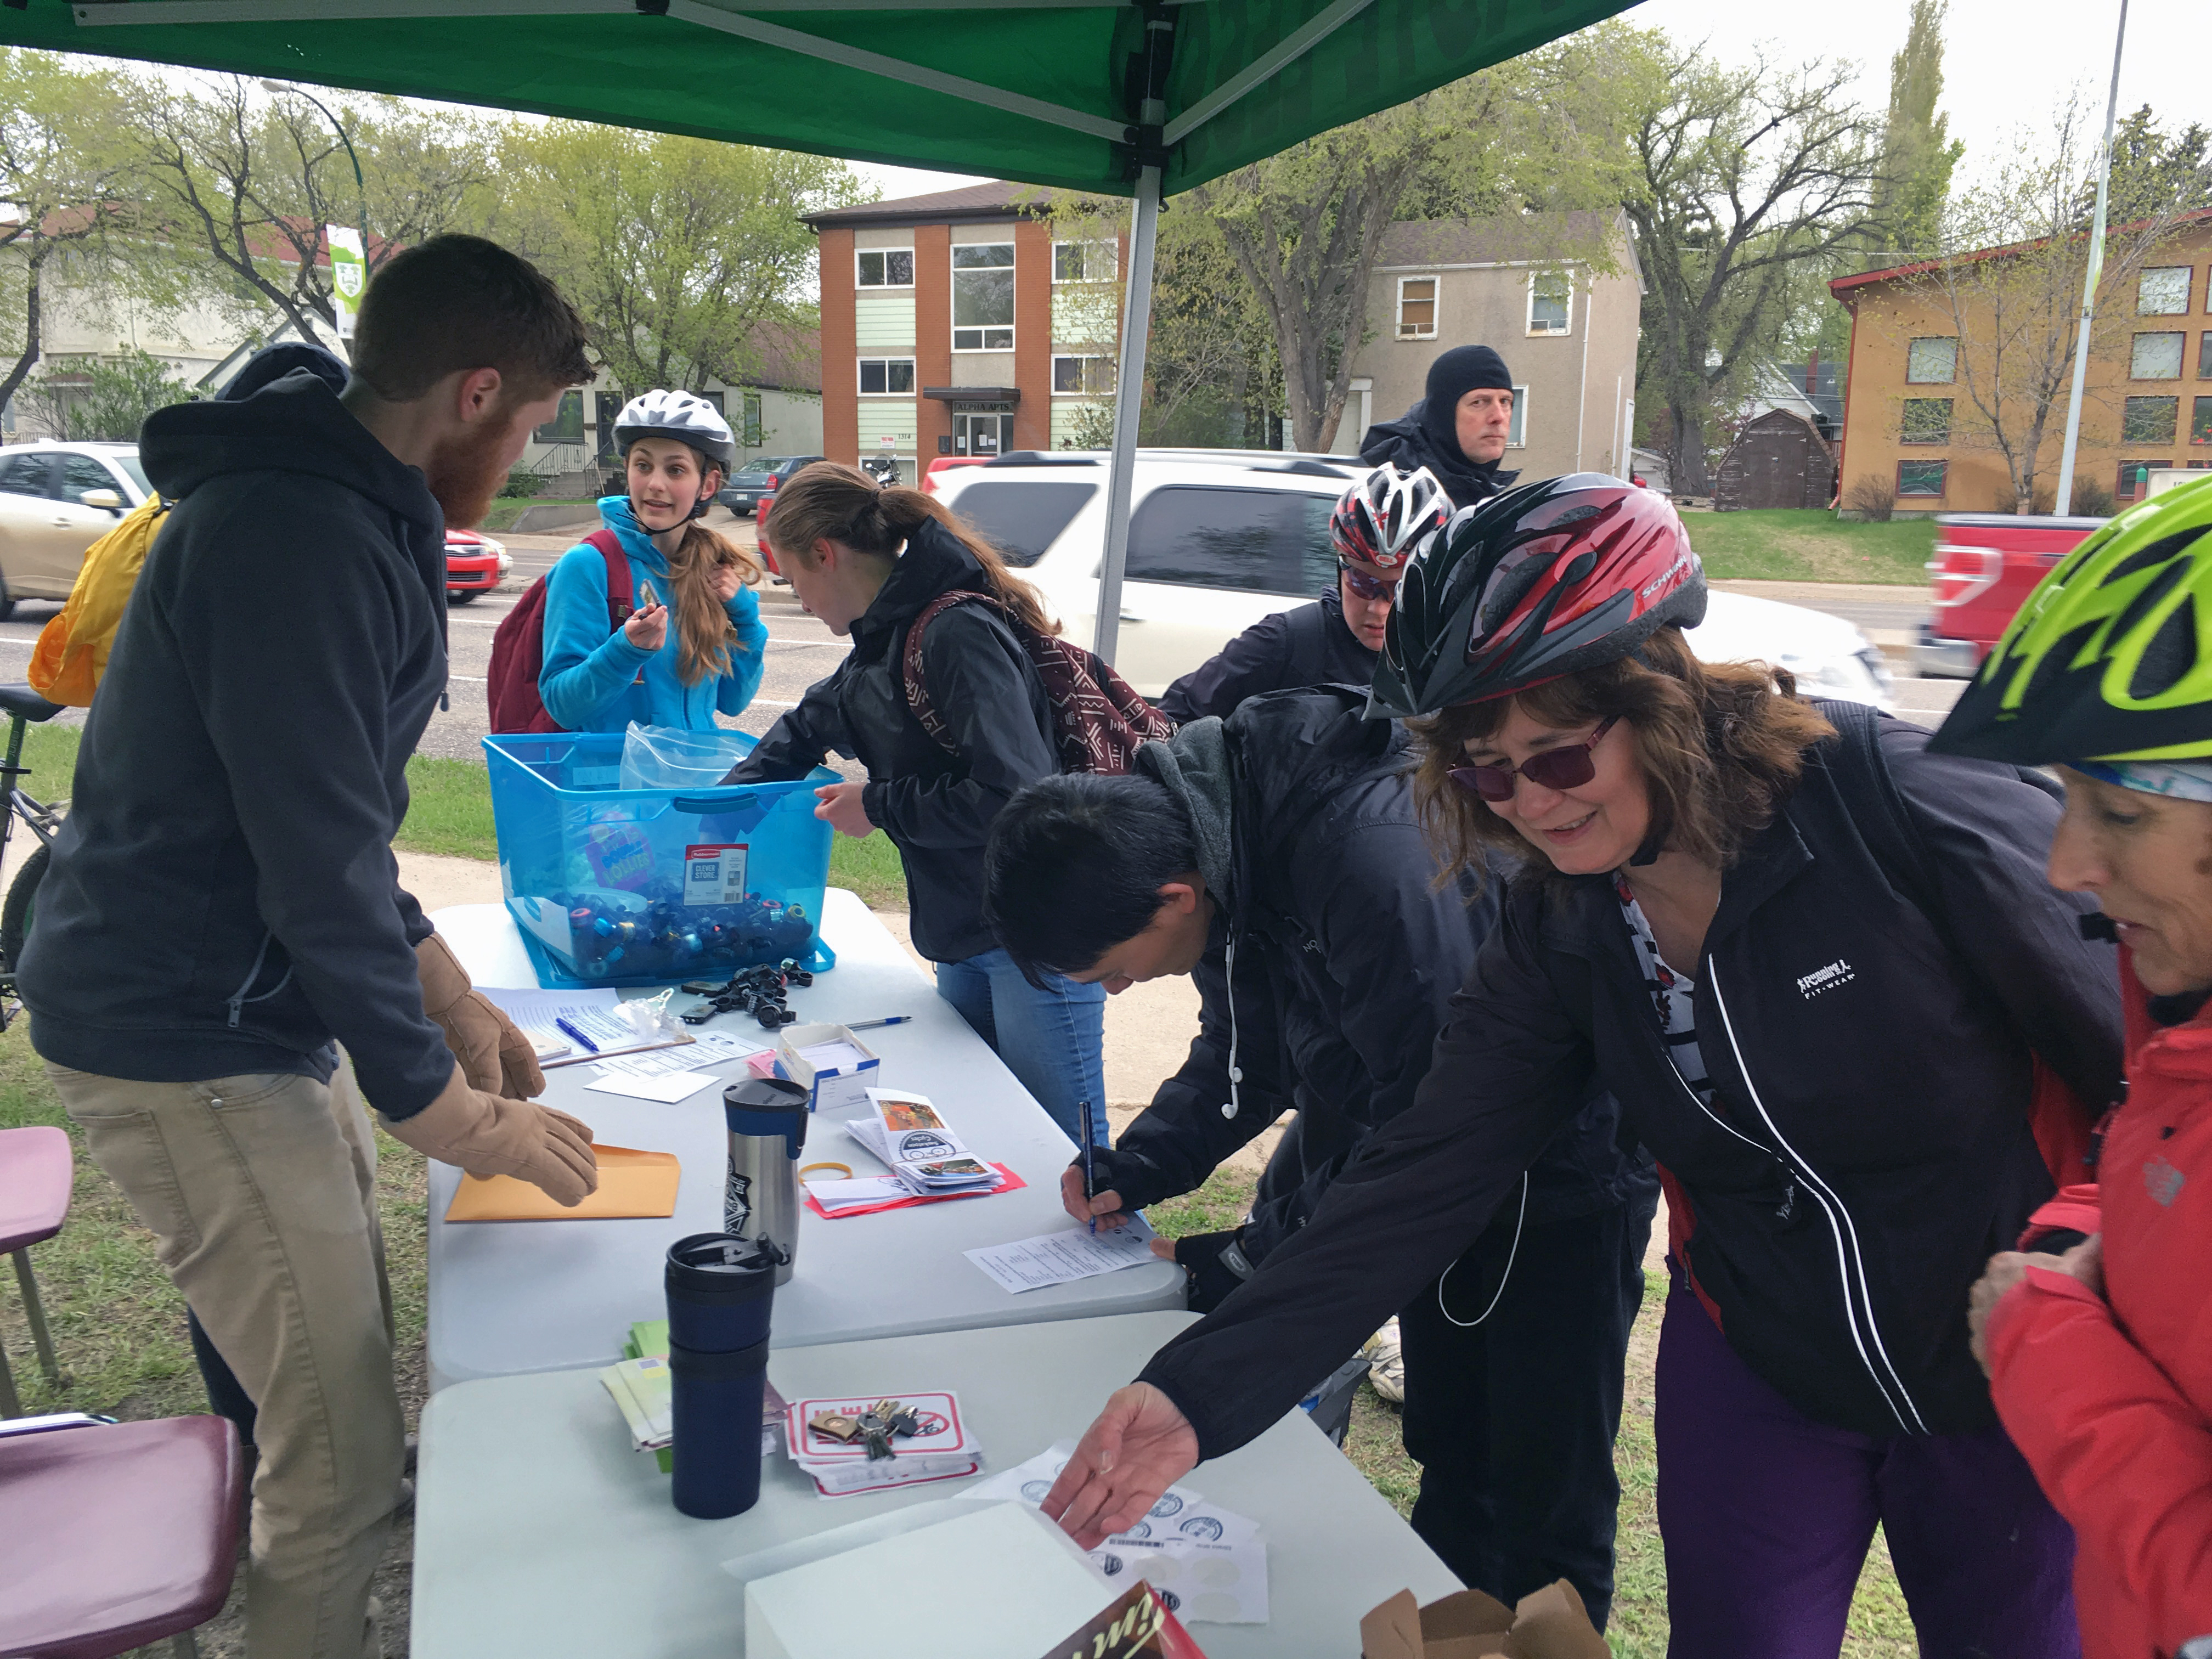 An image from Bike to Work Day 2017